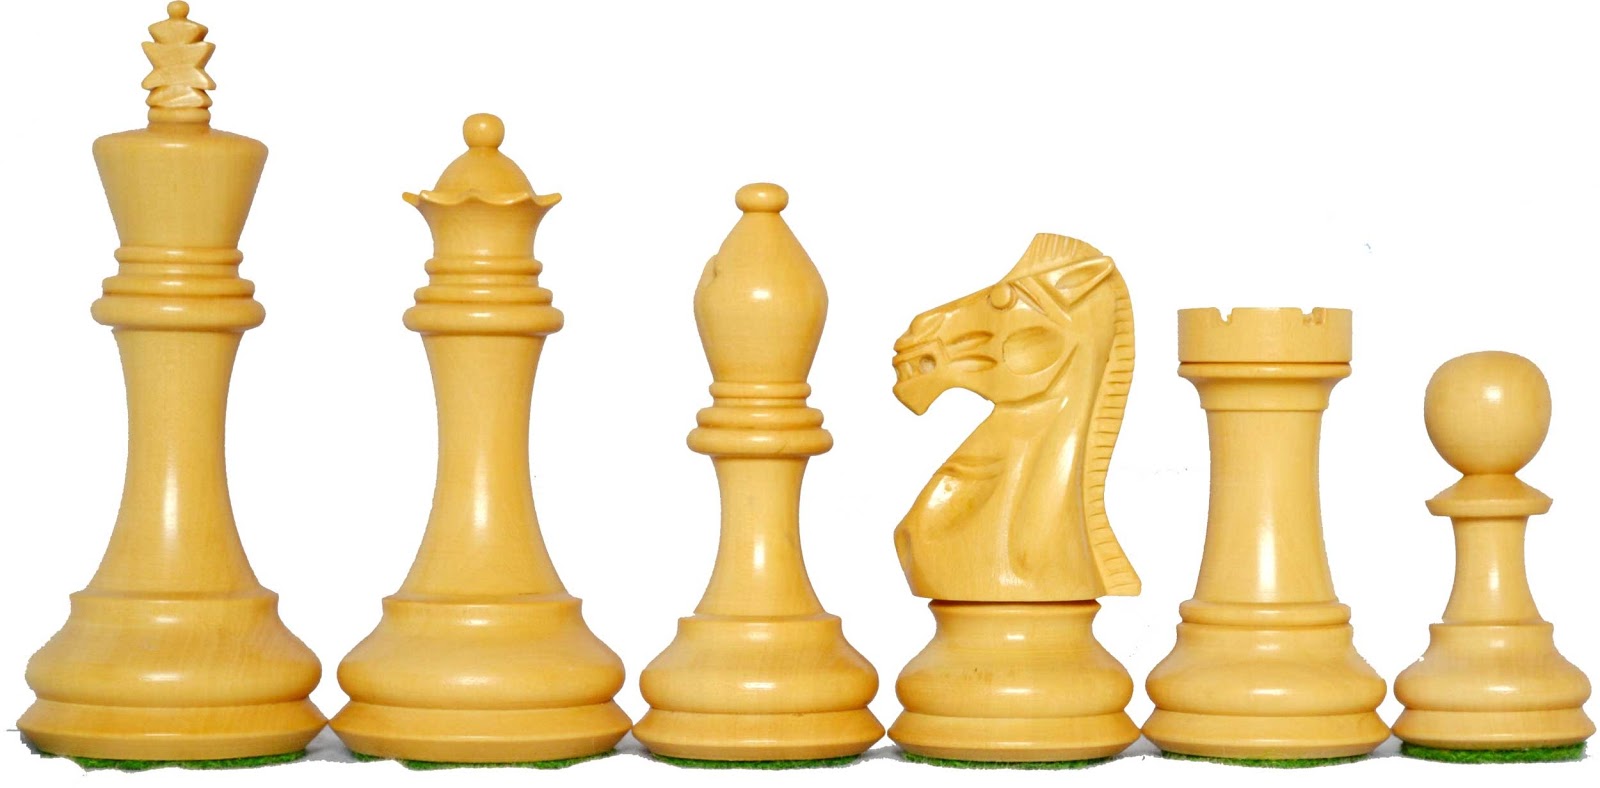 Azacus brand wooden weighted burn design chess set 34 chess pc king height 3.9" 